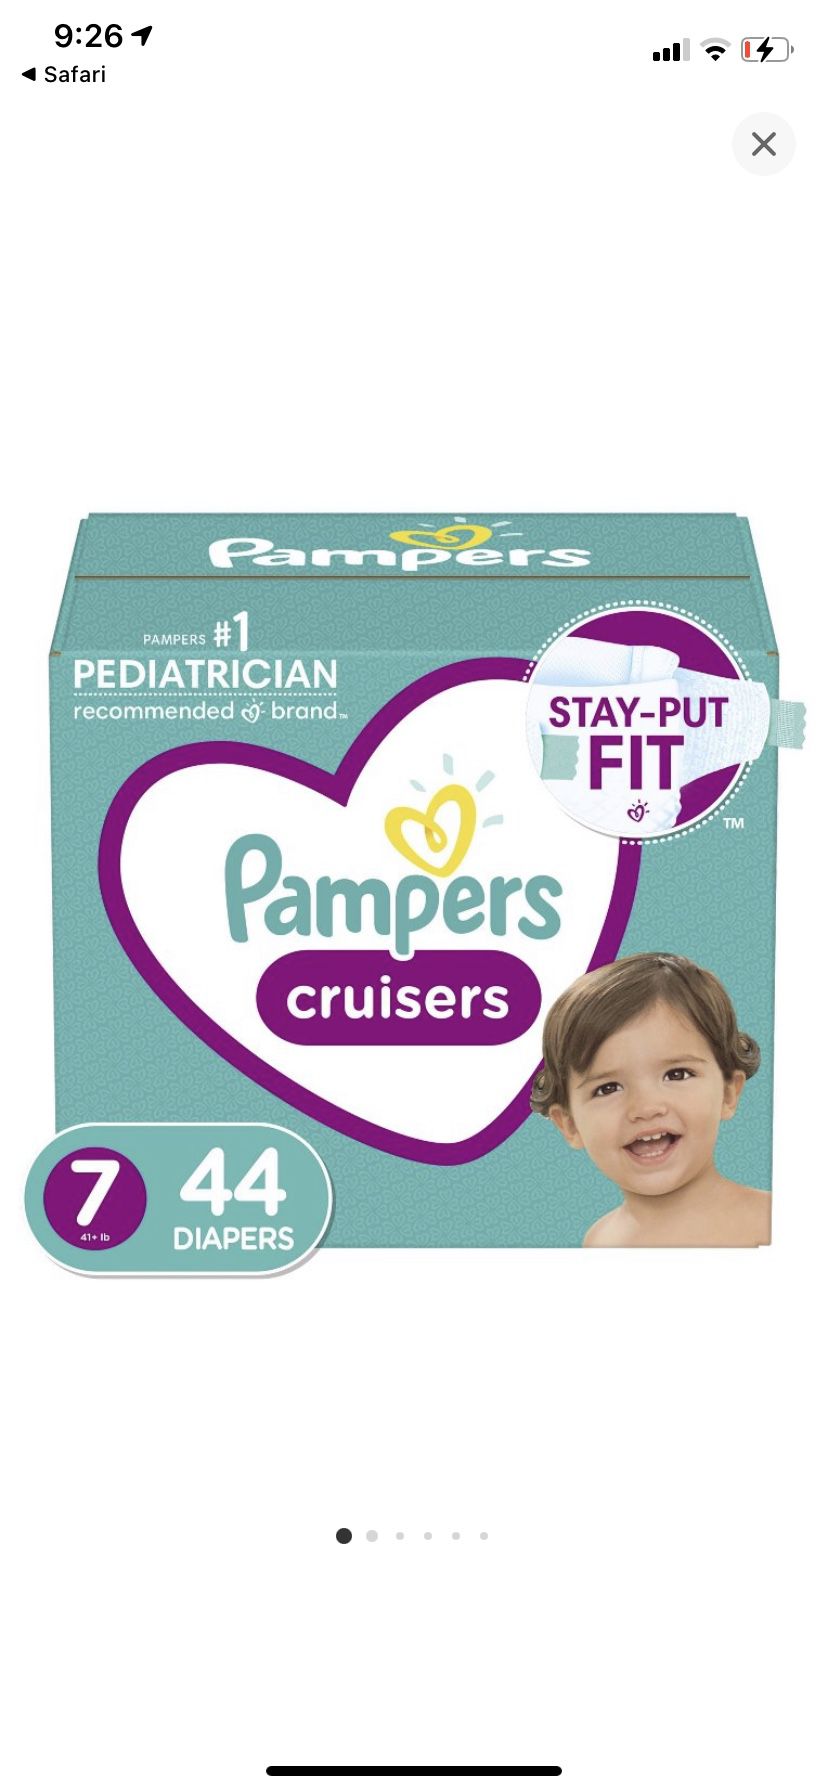 Pampers Cruisers Size 7